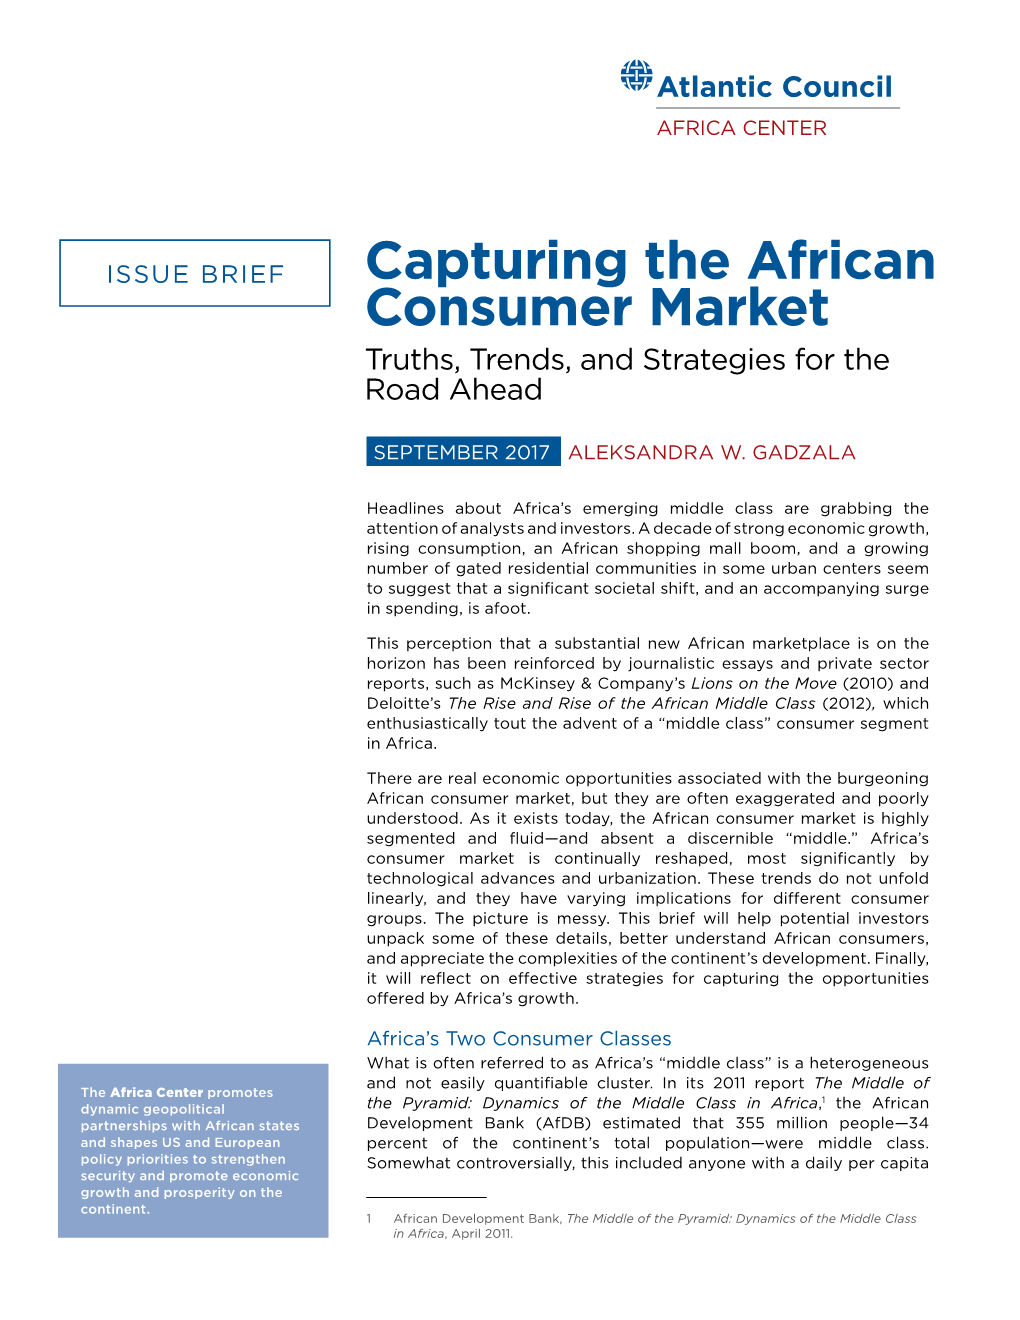 Capturing the African Consumer Market Truths, Trends, and Strategies for the Road Ahead